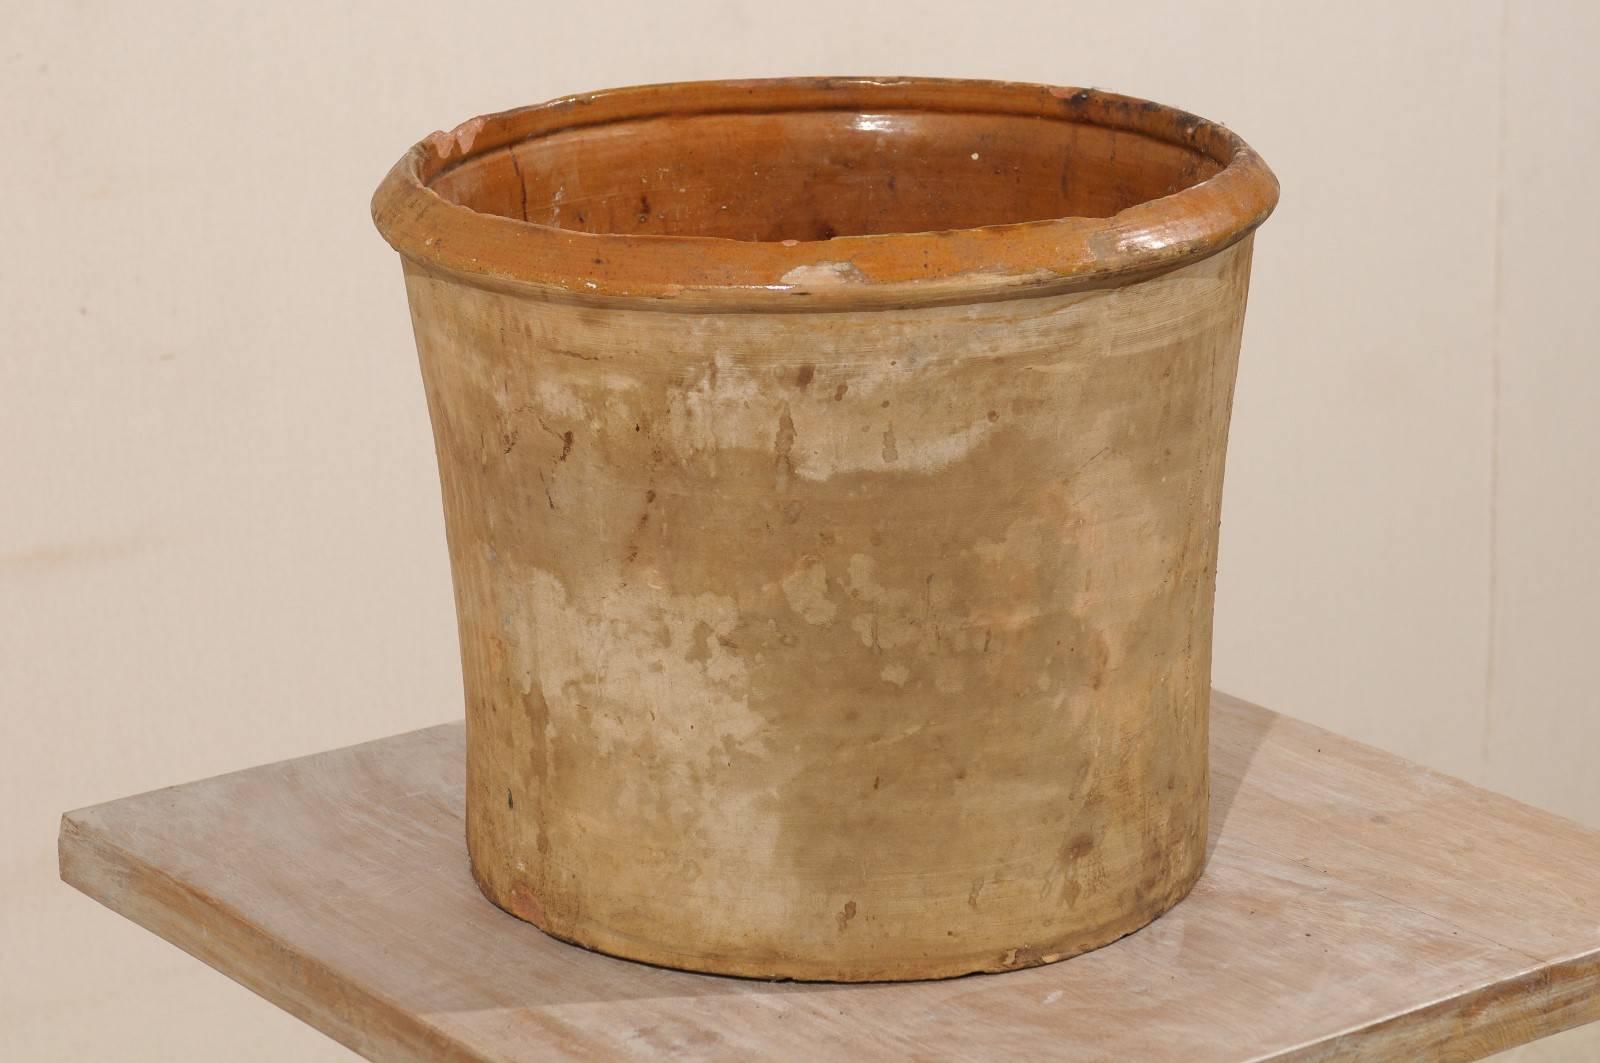 Rustic Spanish Antique Clay Pot with Spout at the Bottom from the 19th Century For Sale